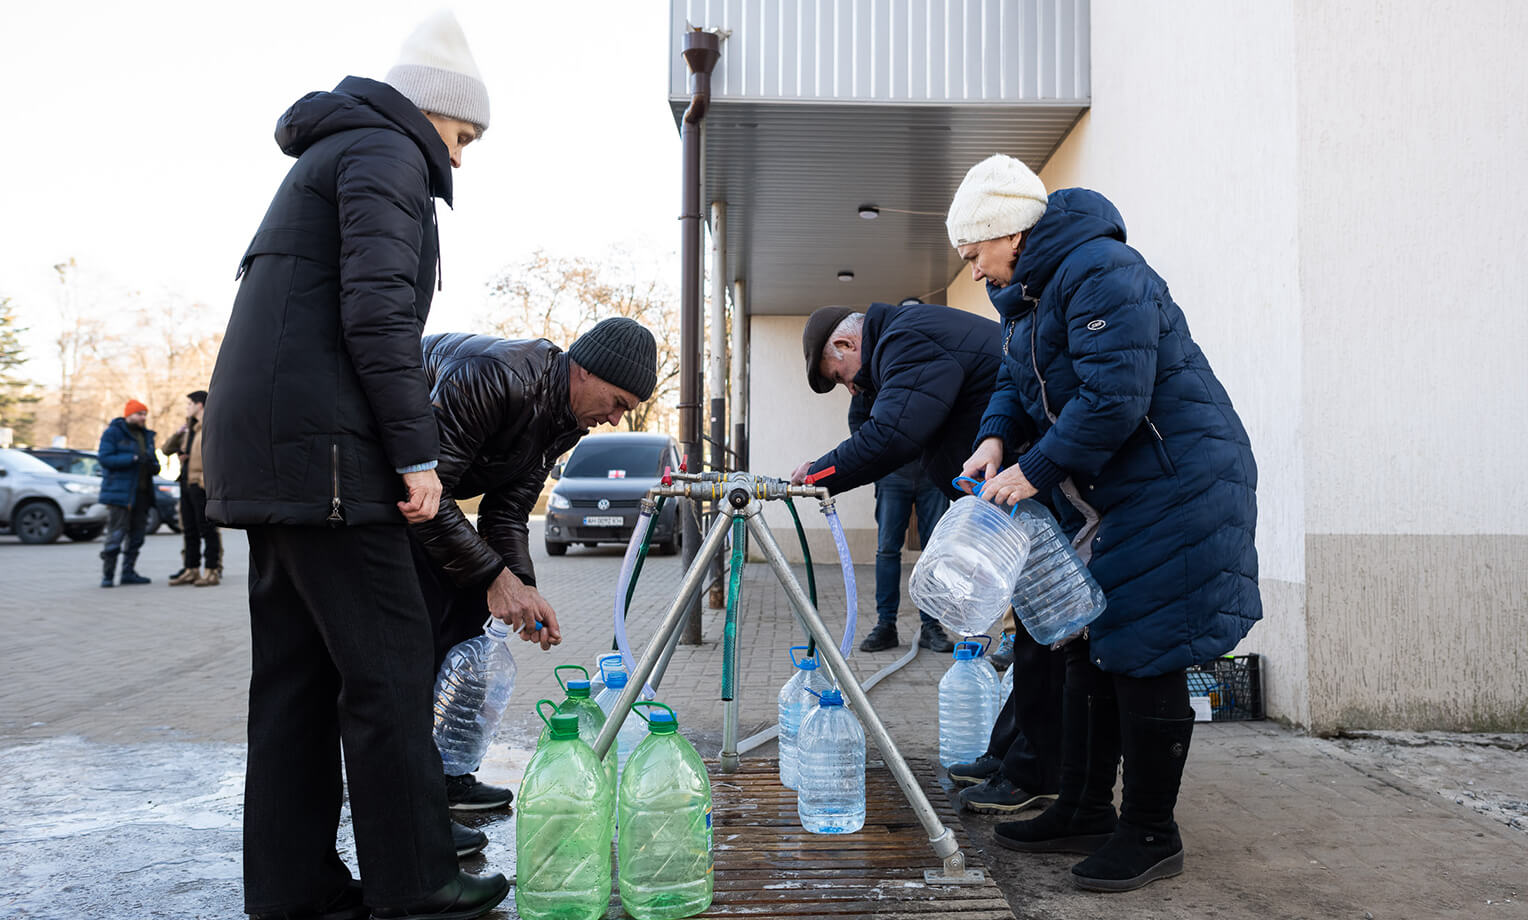 Samartian's Purse has constructed water points for residents in critical areas of eastern Ukraine.